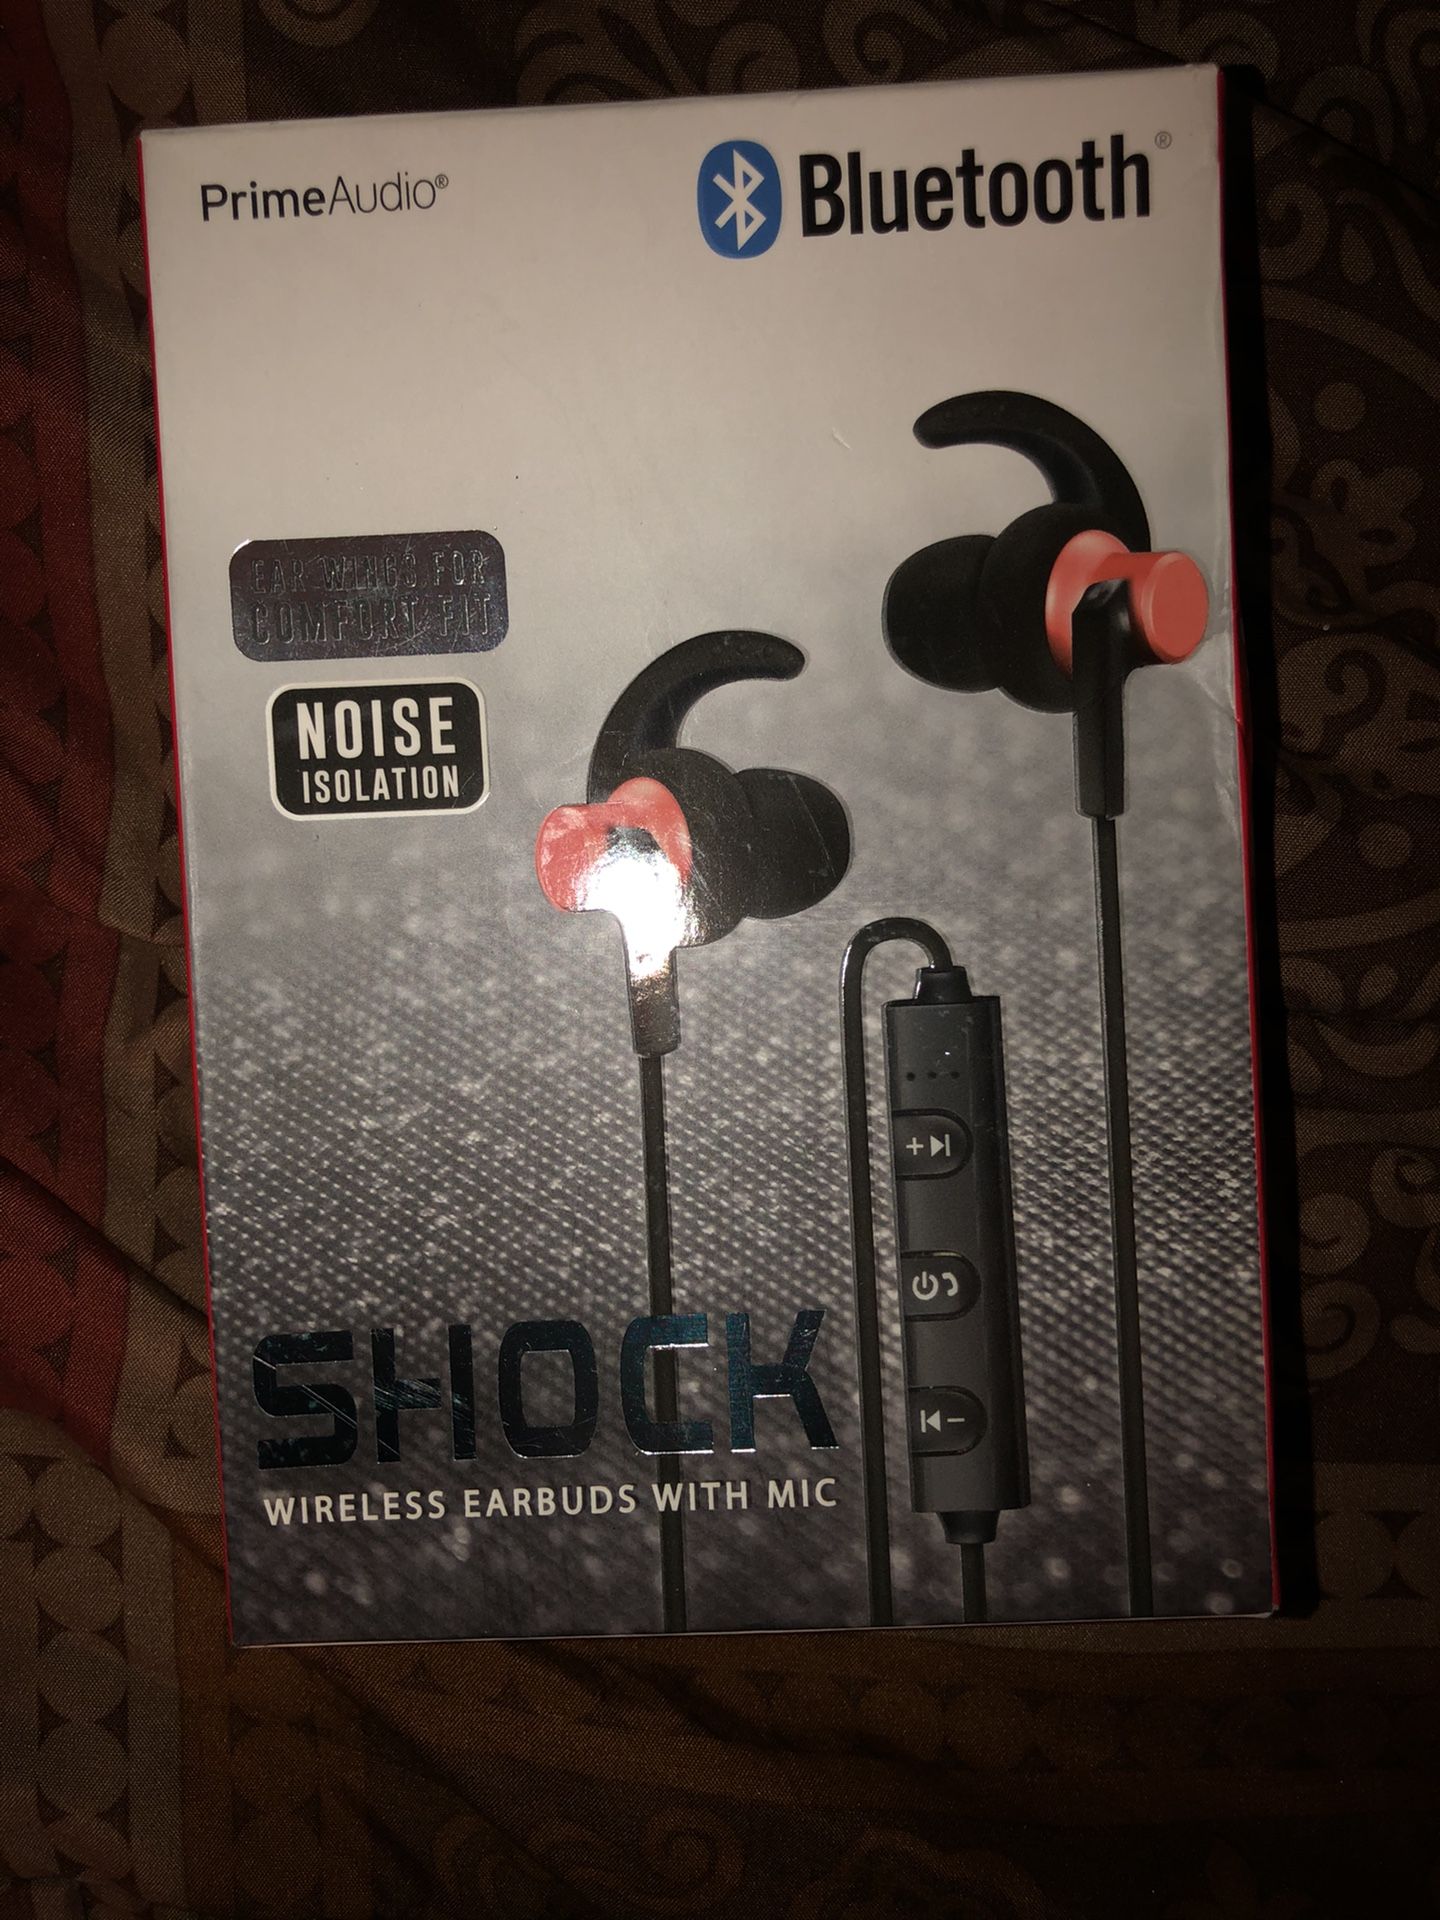 Wireless earbuds with mic